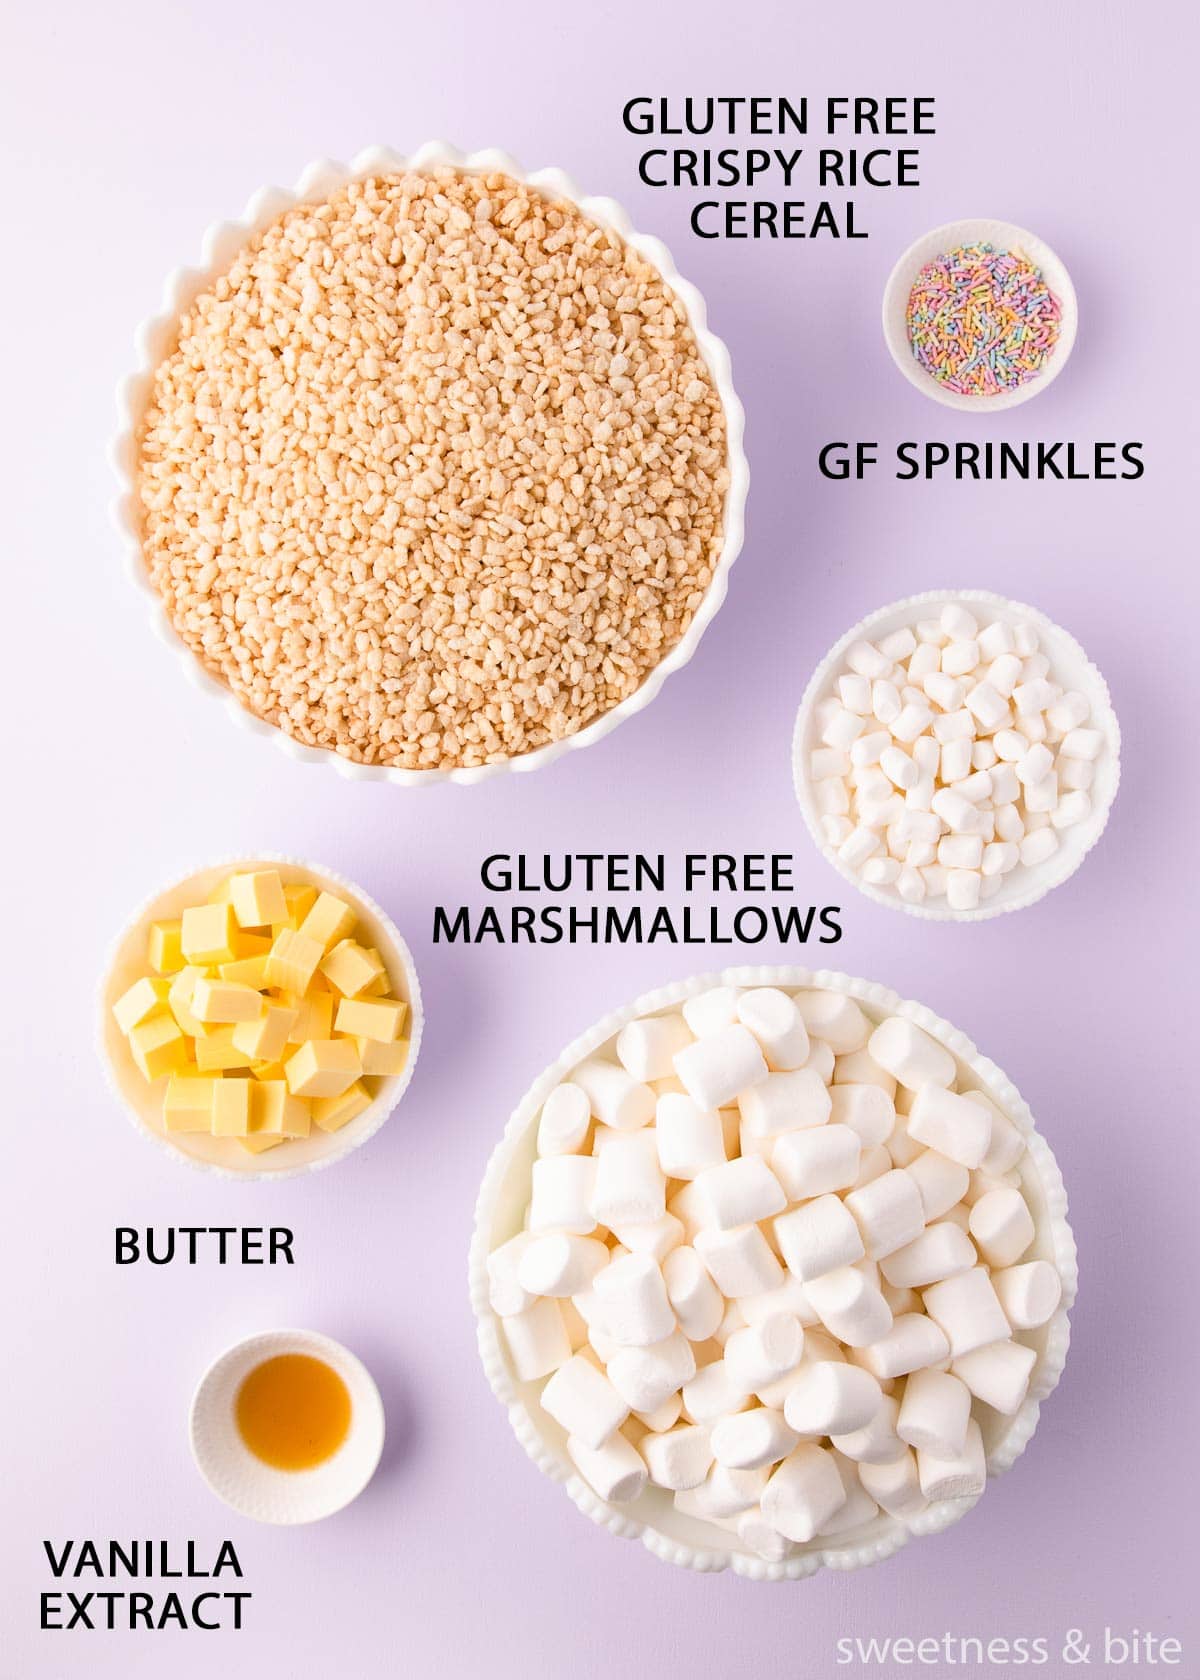 The ingredients in white bowls on a light purple background with labels in black uppercase text.